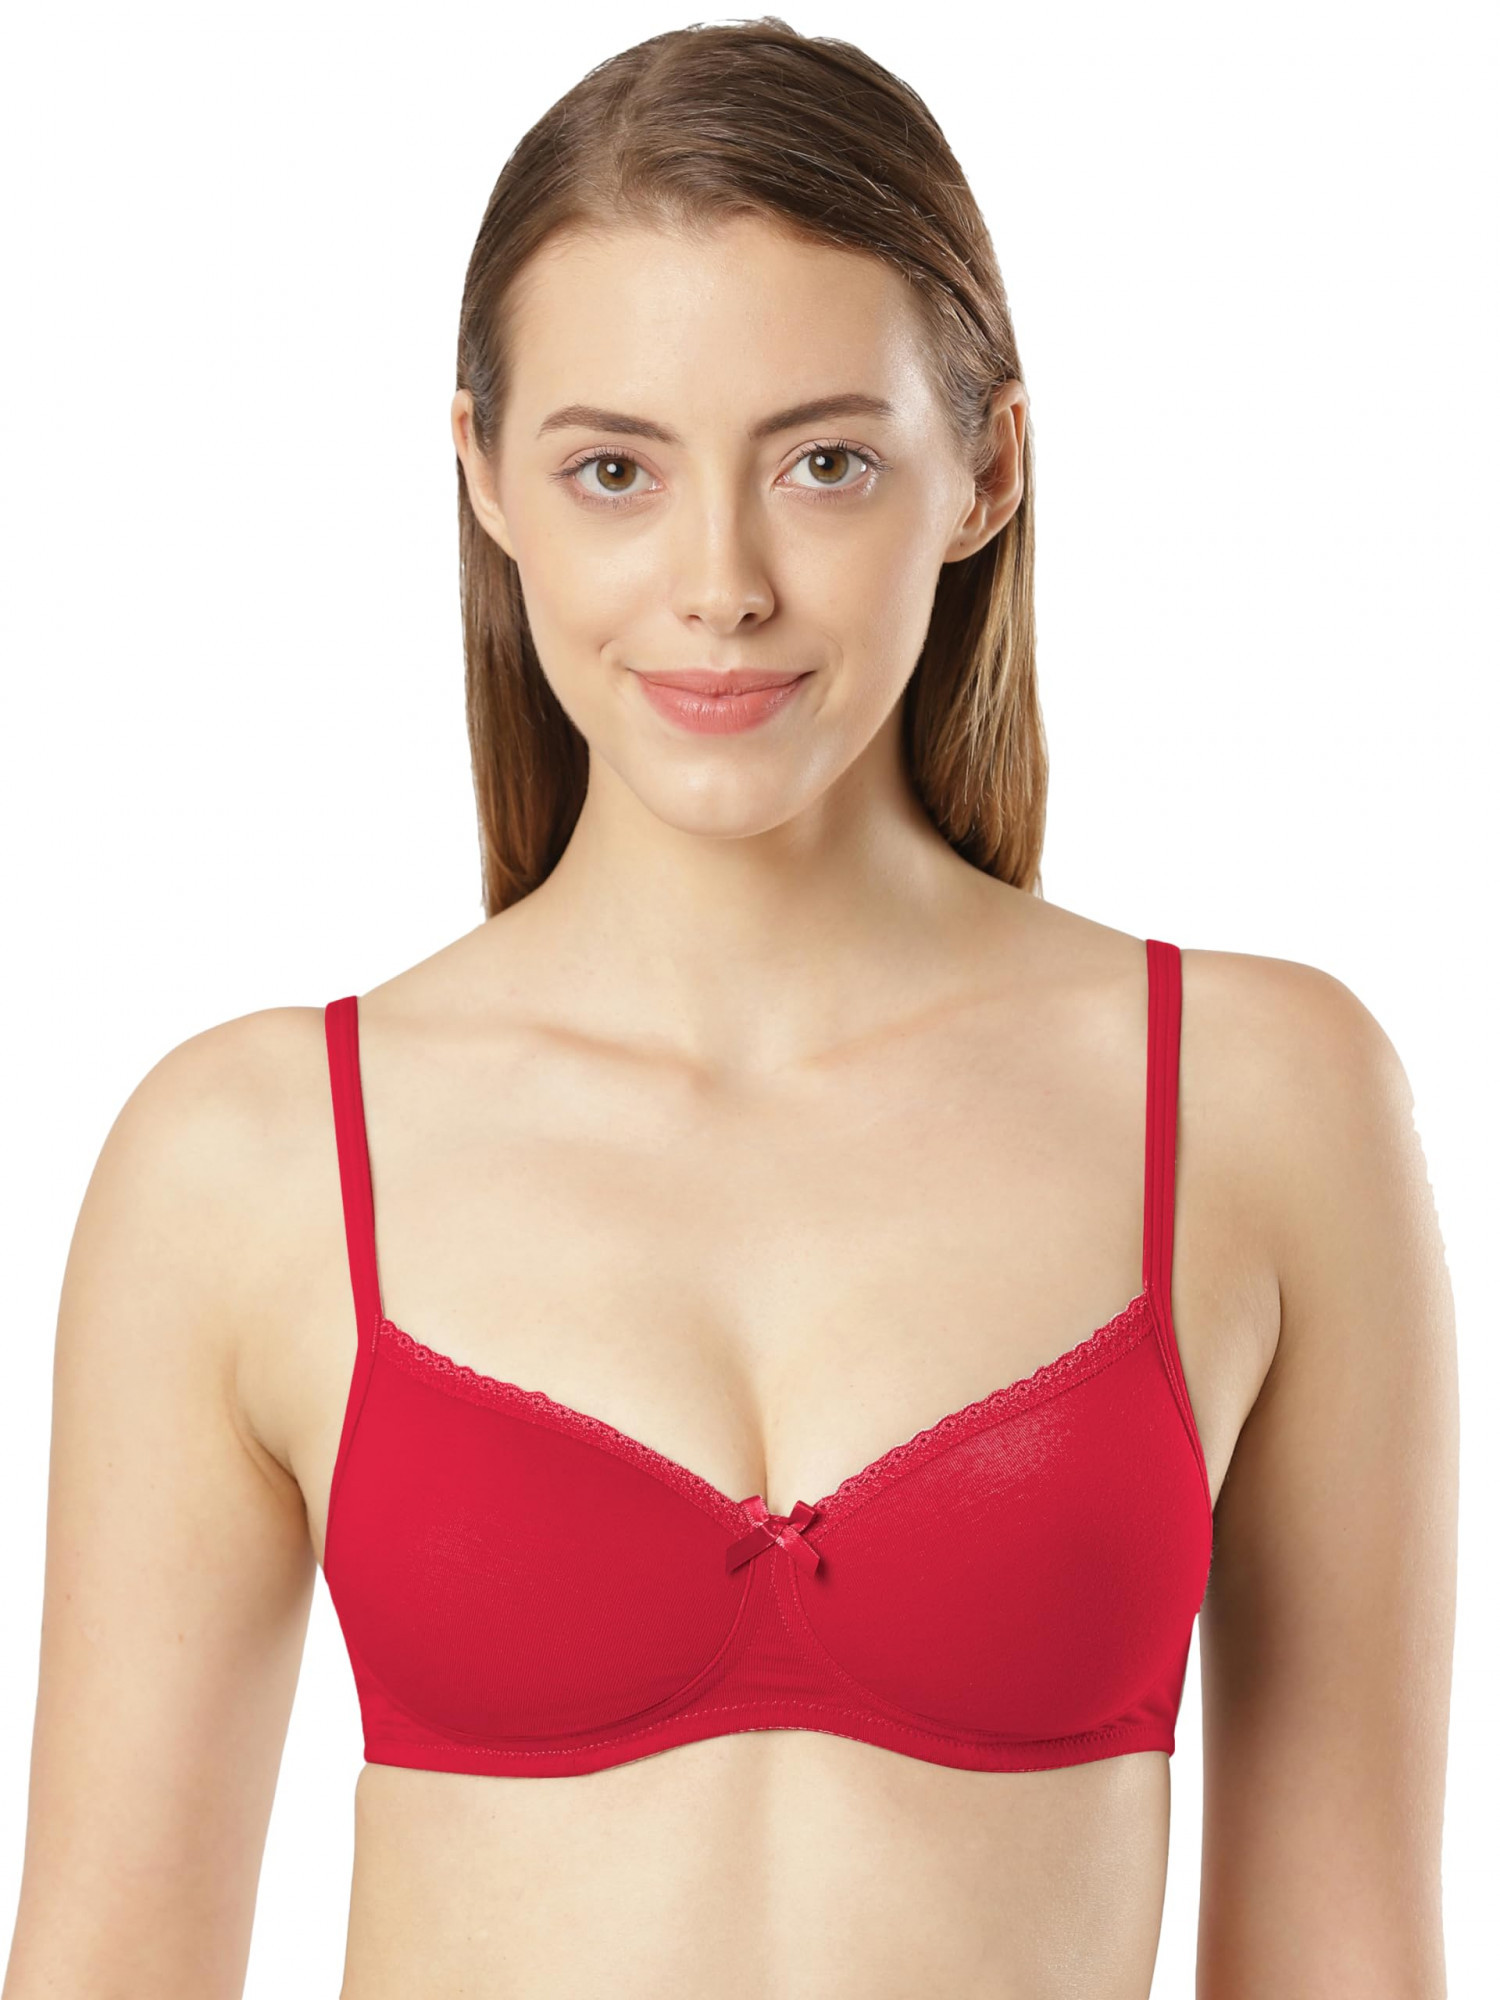 https://www.zebrs.com/uploads/zebrs/products/jockey-1723-womenamp039s-wirefree-padded-super-combed-cotton-elastane-stretch-medium-coverage-lace-styling-t-shirt-bra-with-adjustable-strapssangria-red38bsize-38c-69887423936310_l.jpg